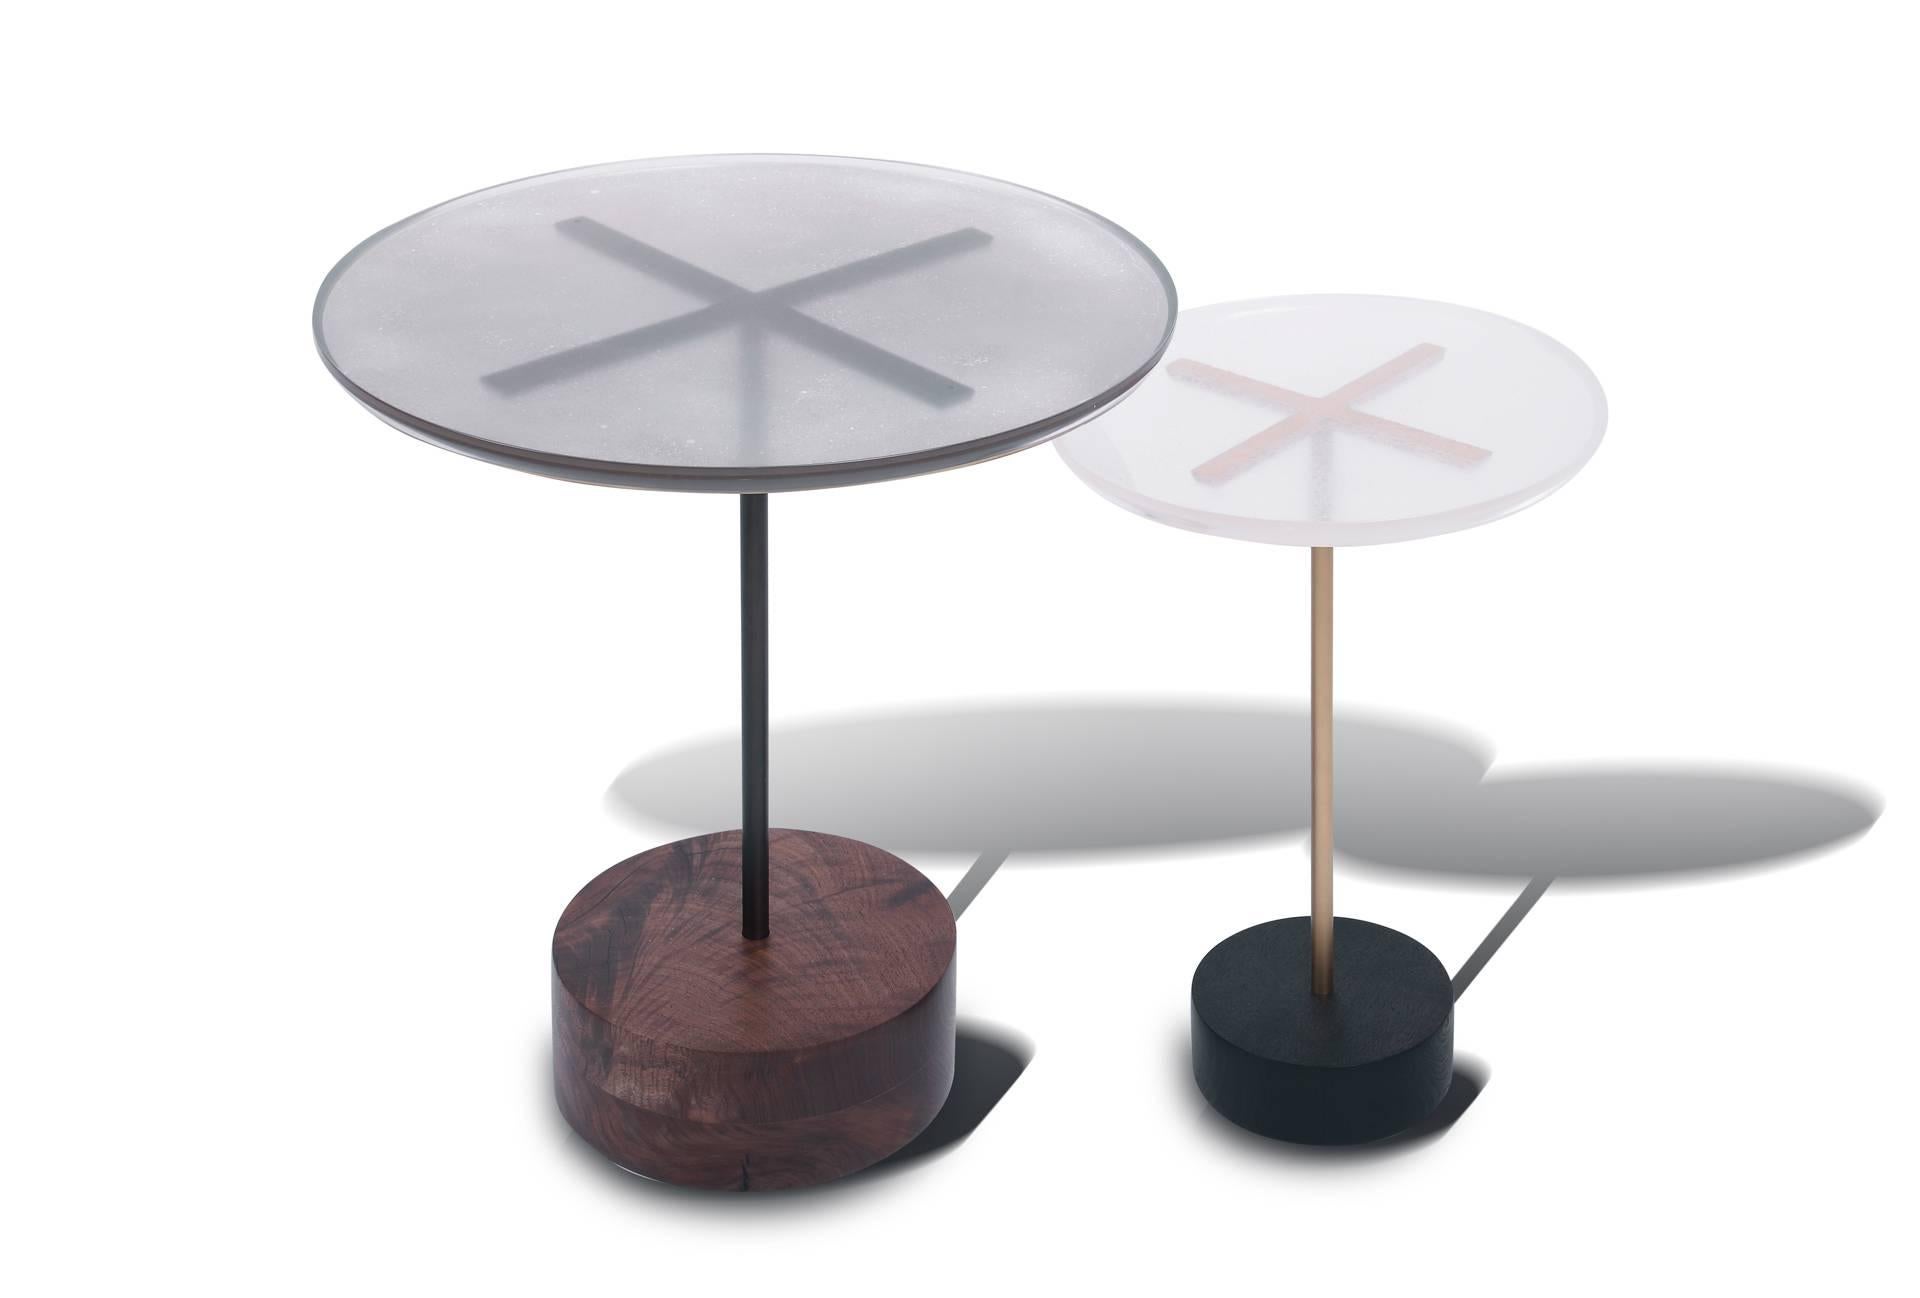 The effortlessly chic Stella end tables feature a Lucite, metallic powder and epoxy resin tabletop and bronze and walnut base. Playful, yet sophisticated, these meticulously crafted tables will compliment any space.

Note: Tables can be sold